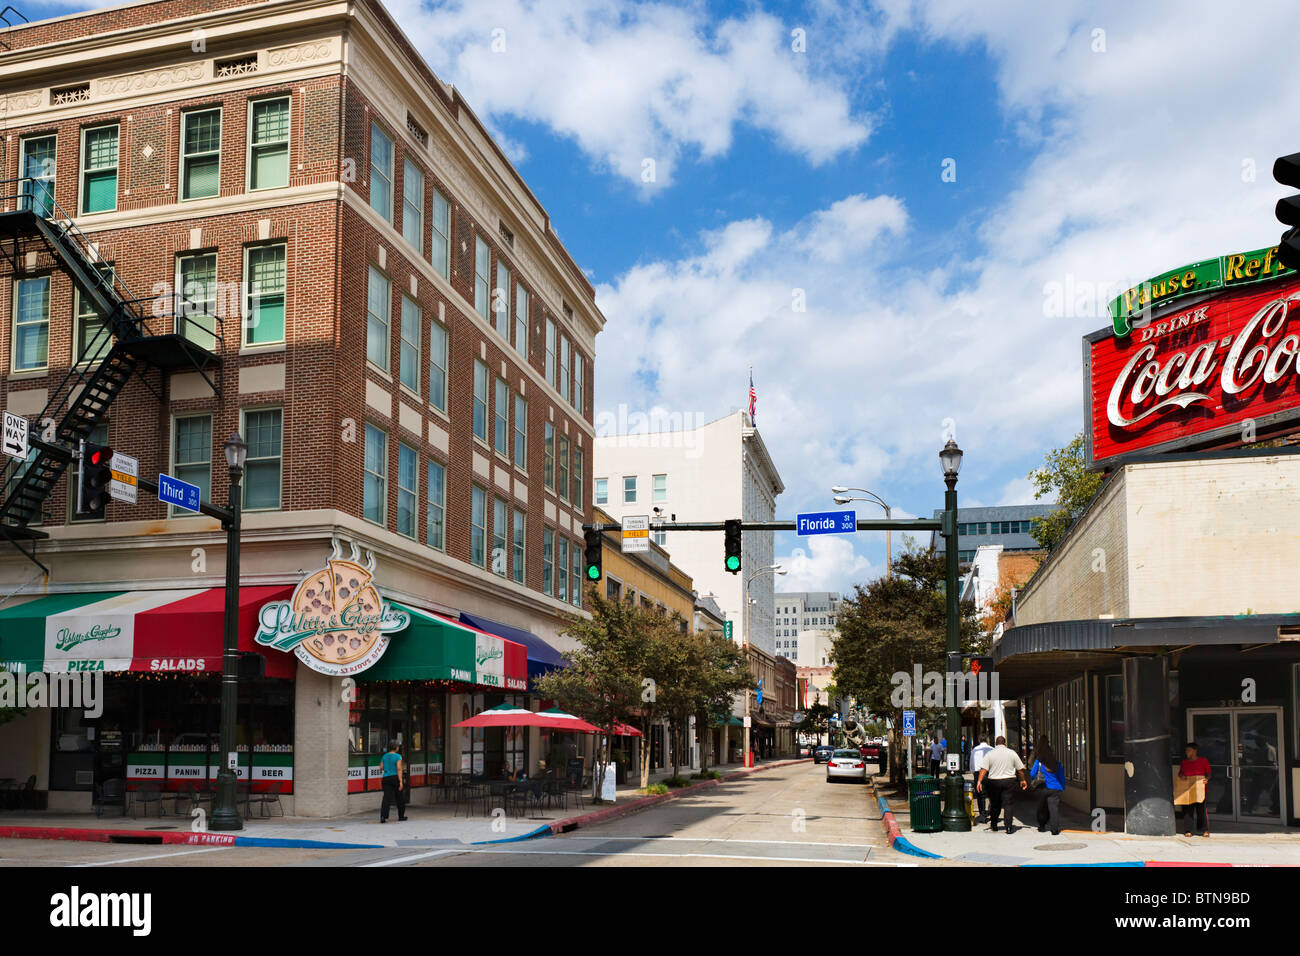 Restaurants and shops on 3rd Street and Florida in downtown Baton Rouge, Lousiana, USA Stock Photo